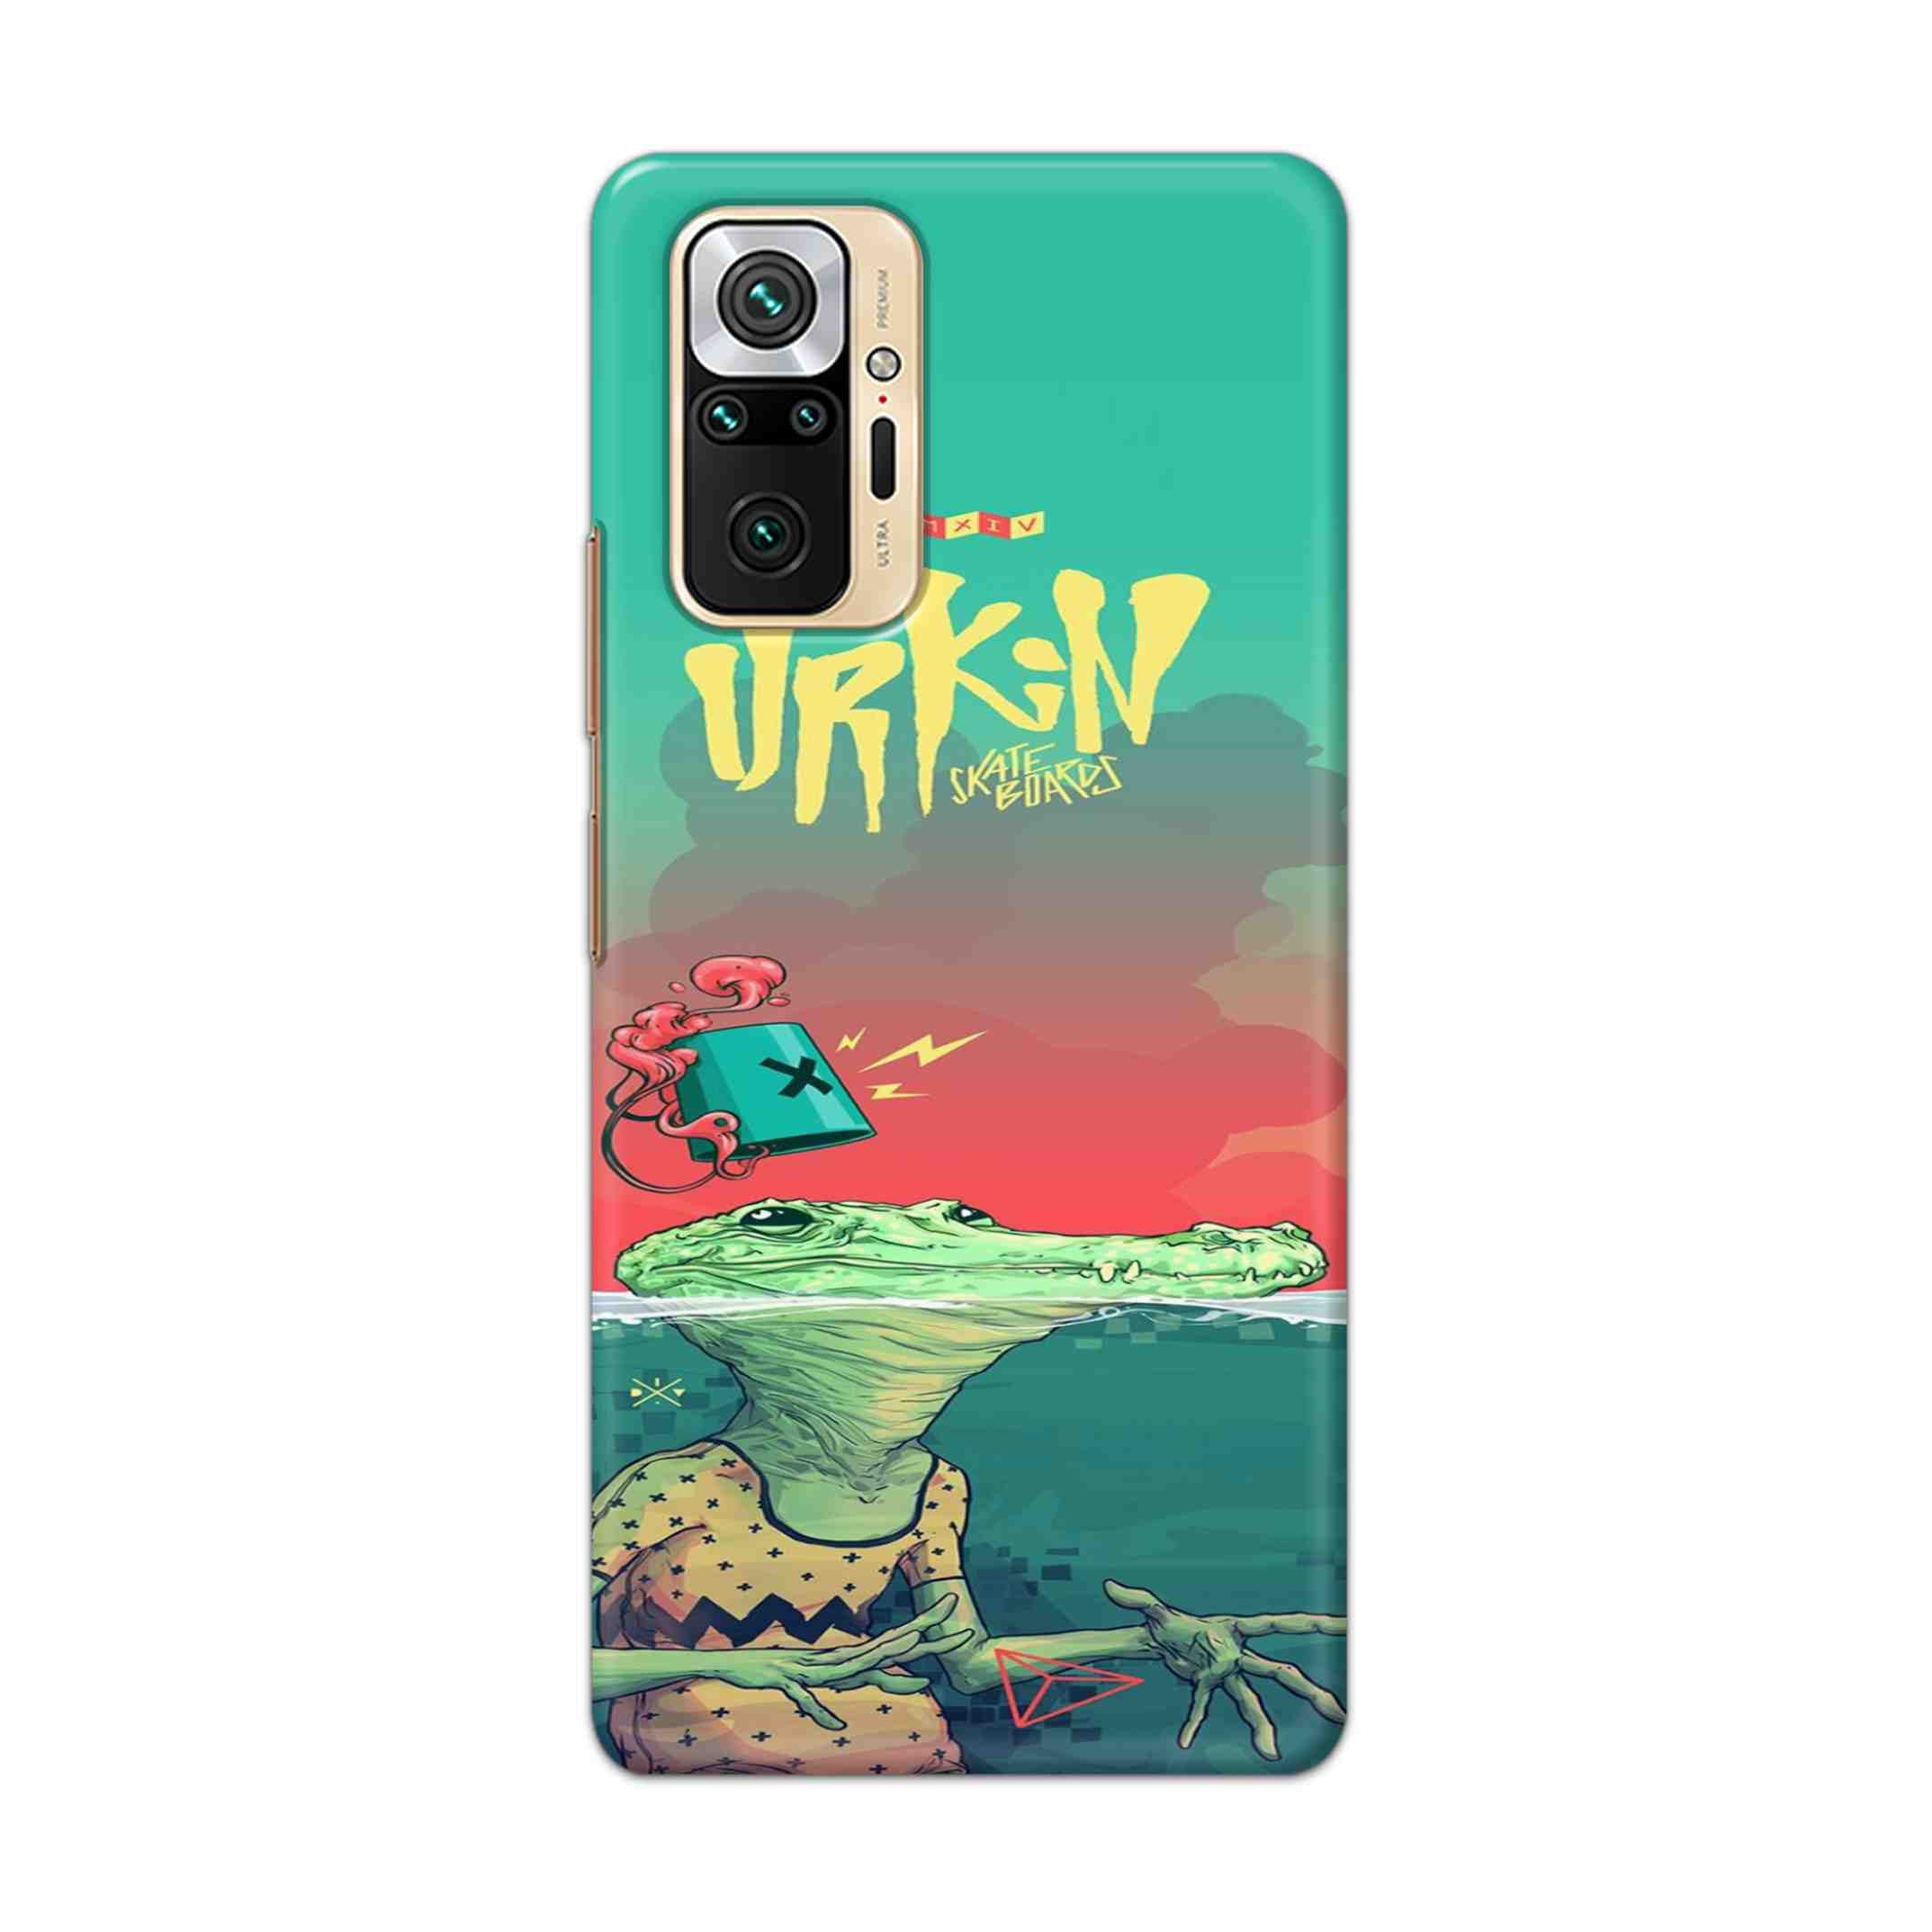 Buy Urkin Hard Back Mobile Phone Case Cover For Redmi Note 10 Pro Online